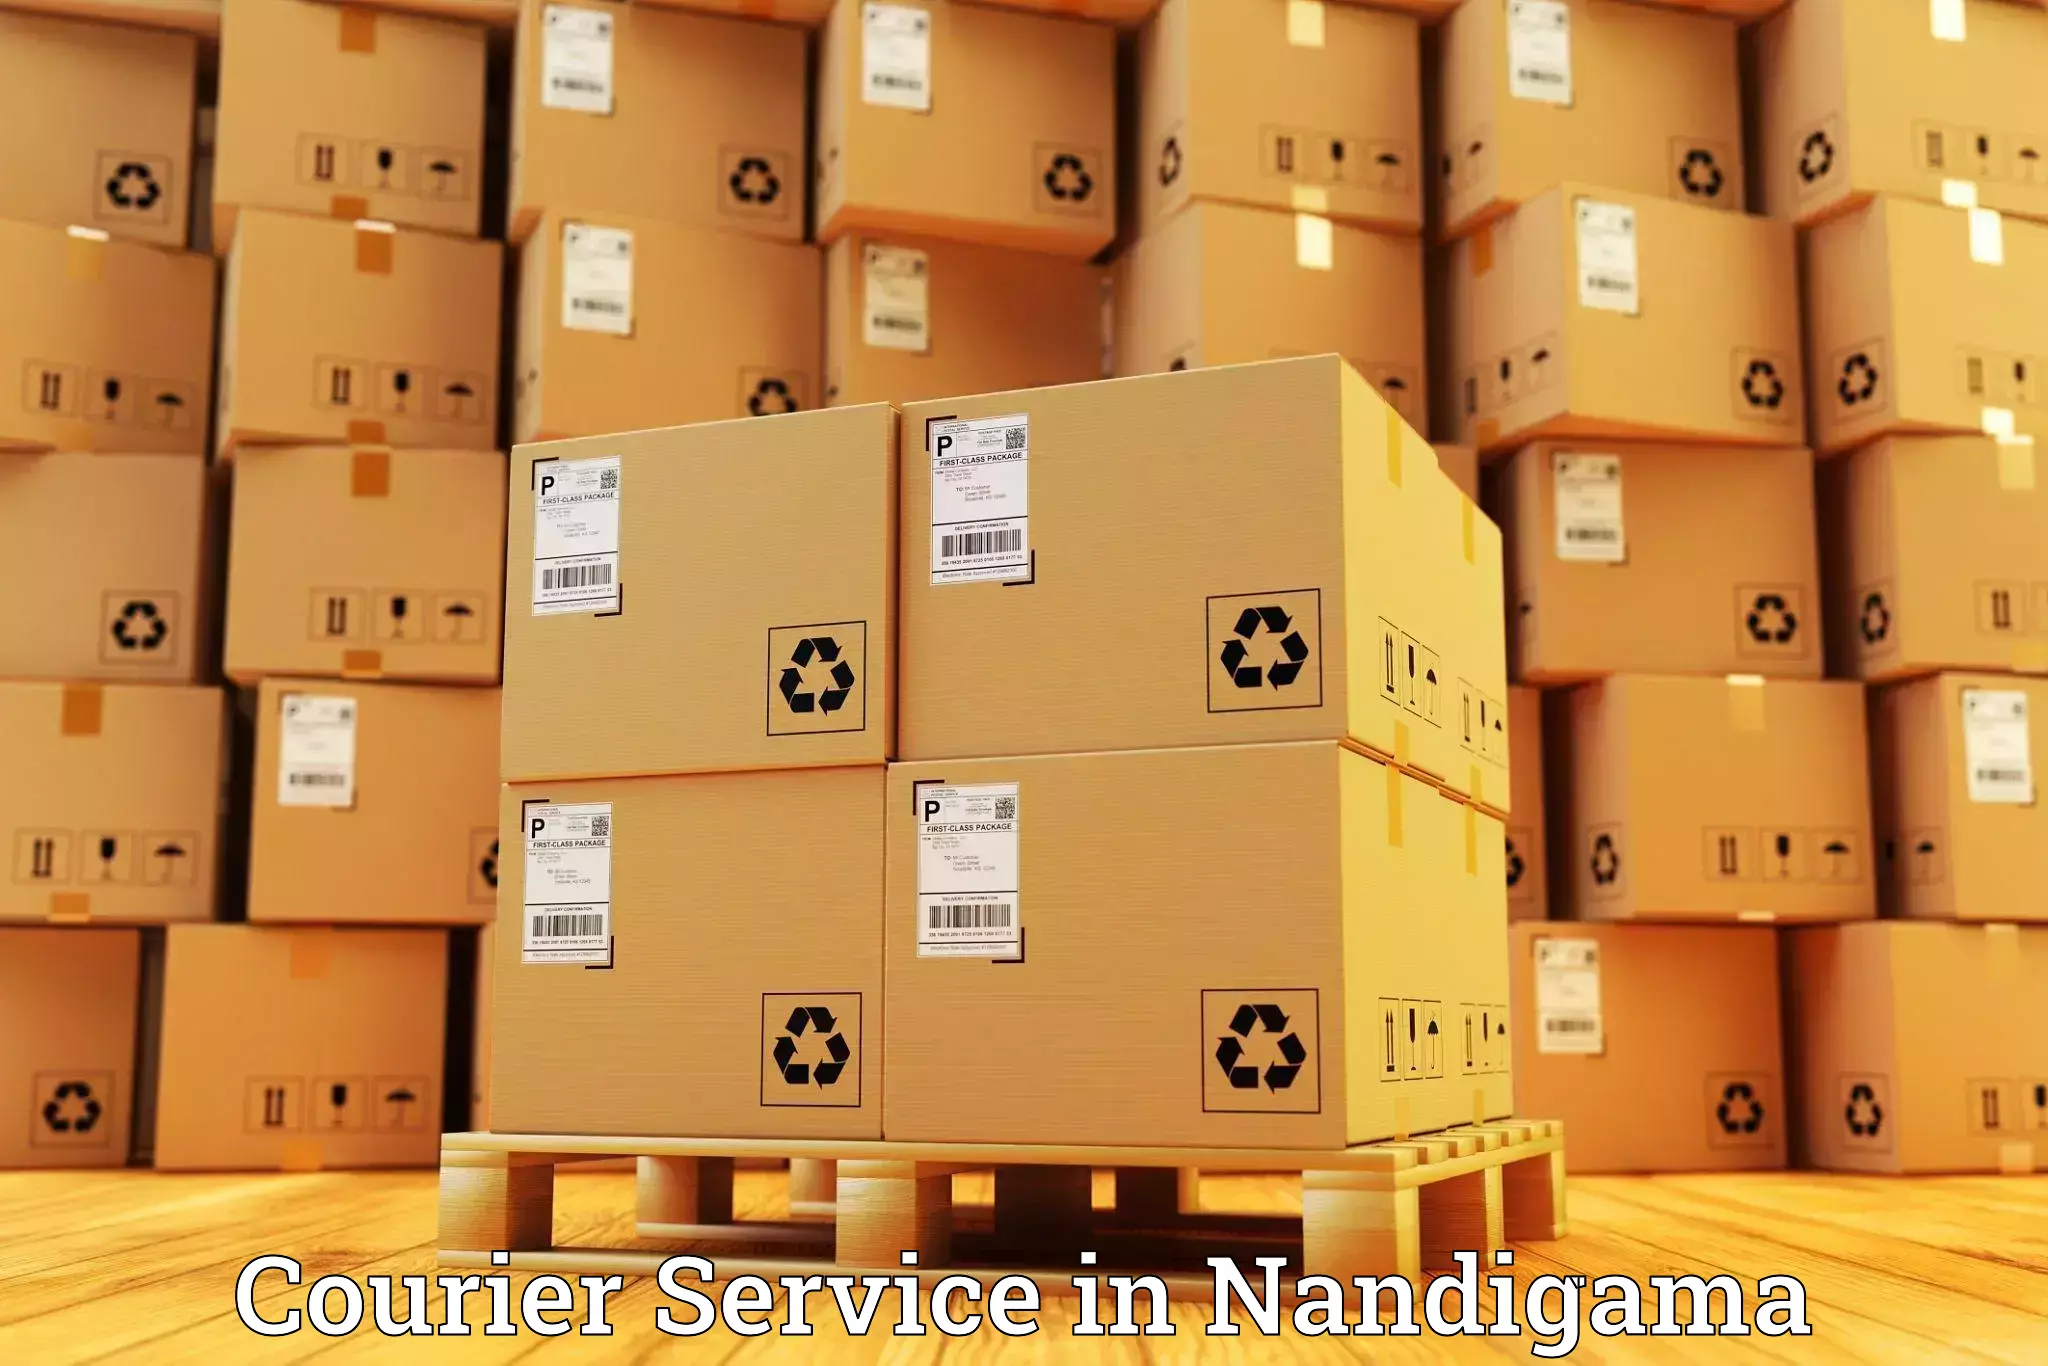 Courier service efficiency in Nandigama